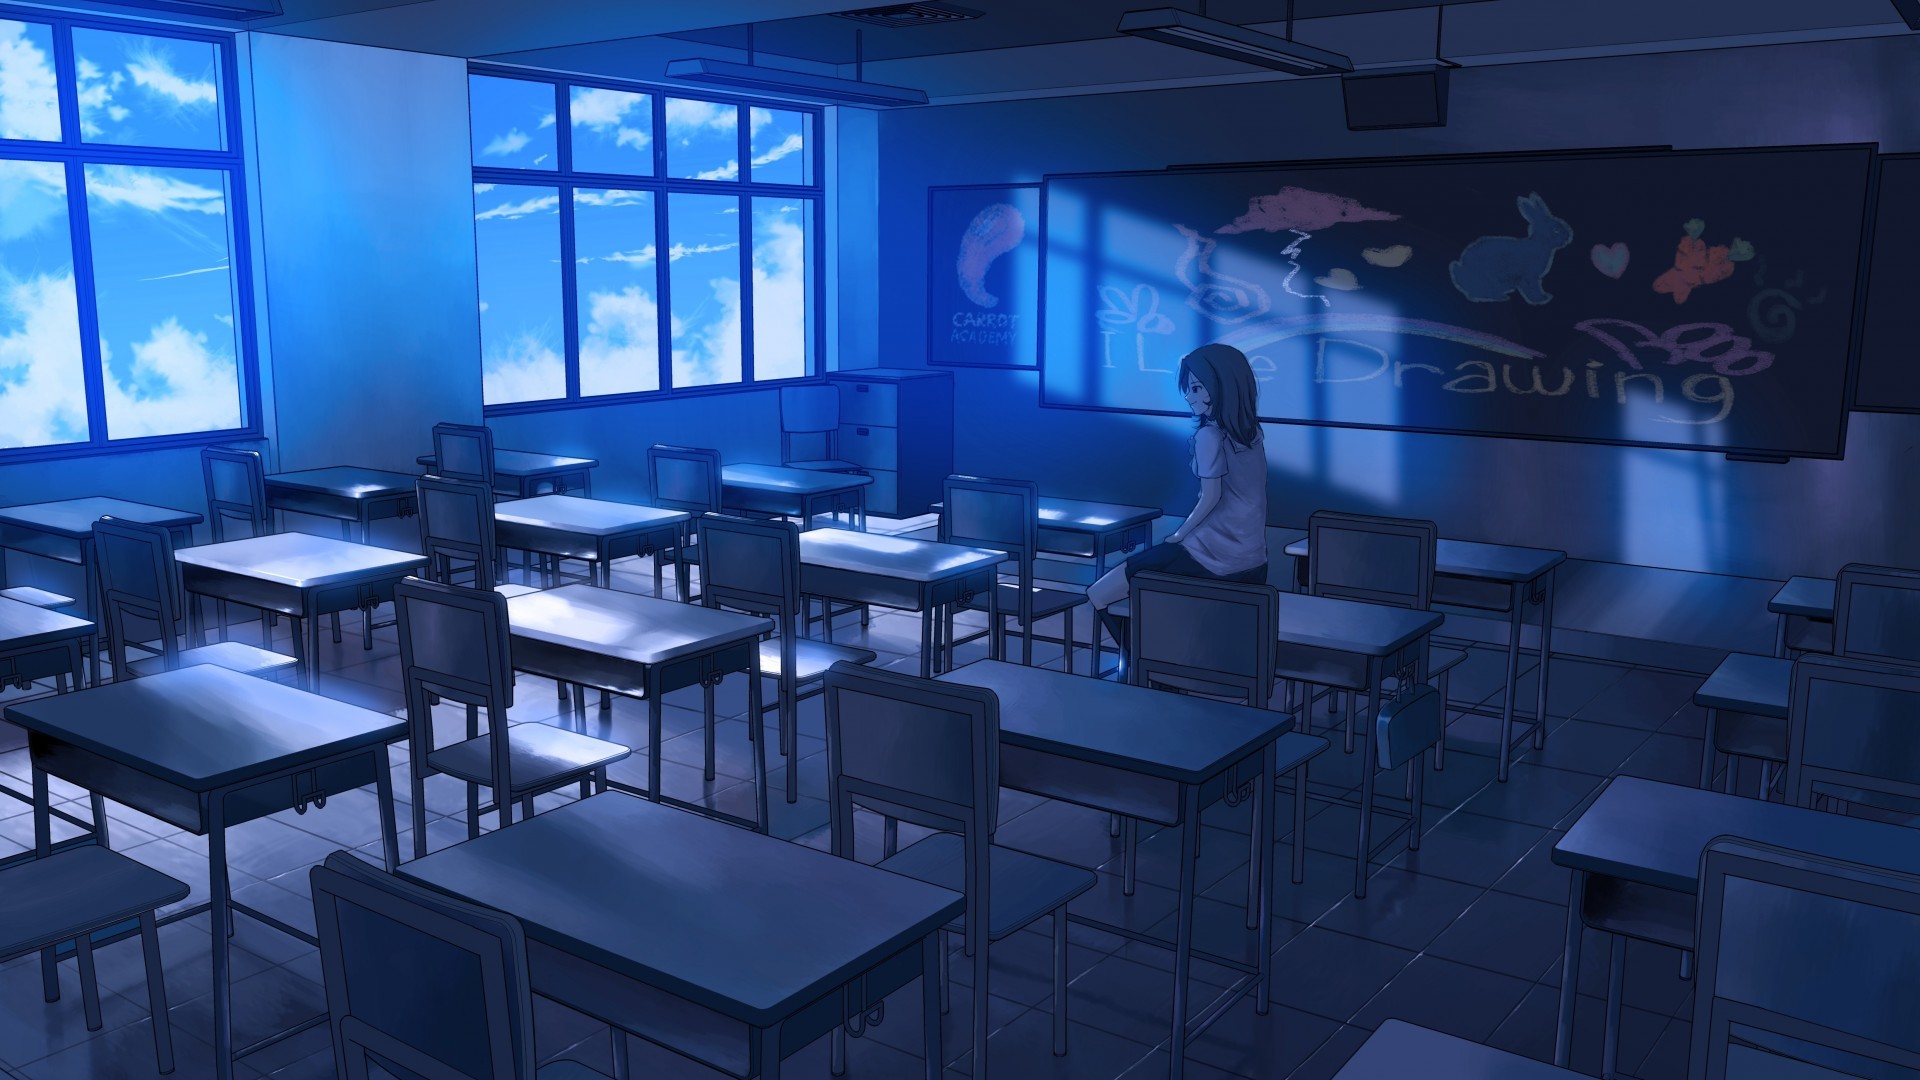 1920x1080 alone girl sitting on a table in classroom looking out window